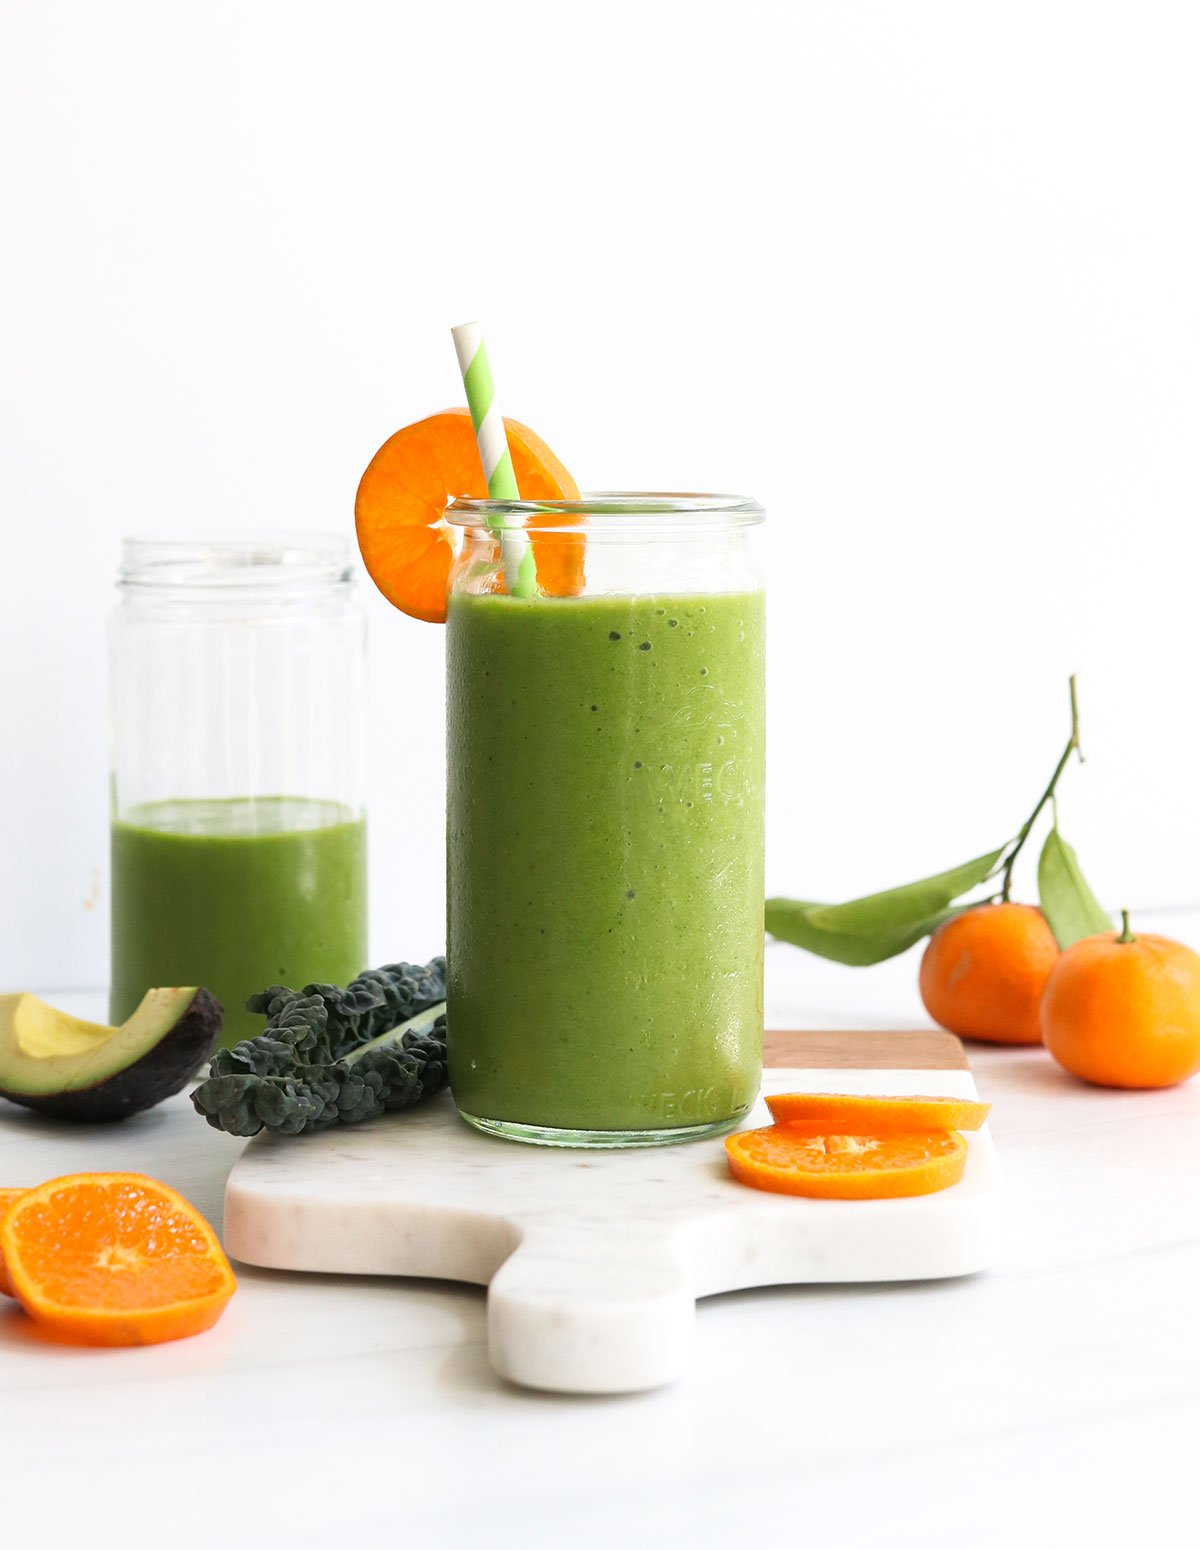 kale smoothie served in glass with an orange slice and straw.